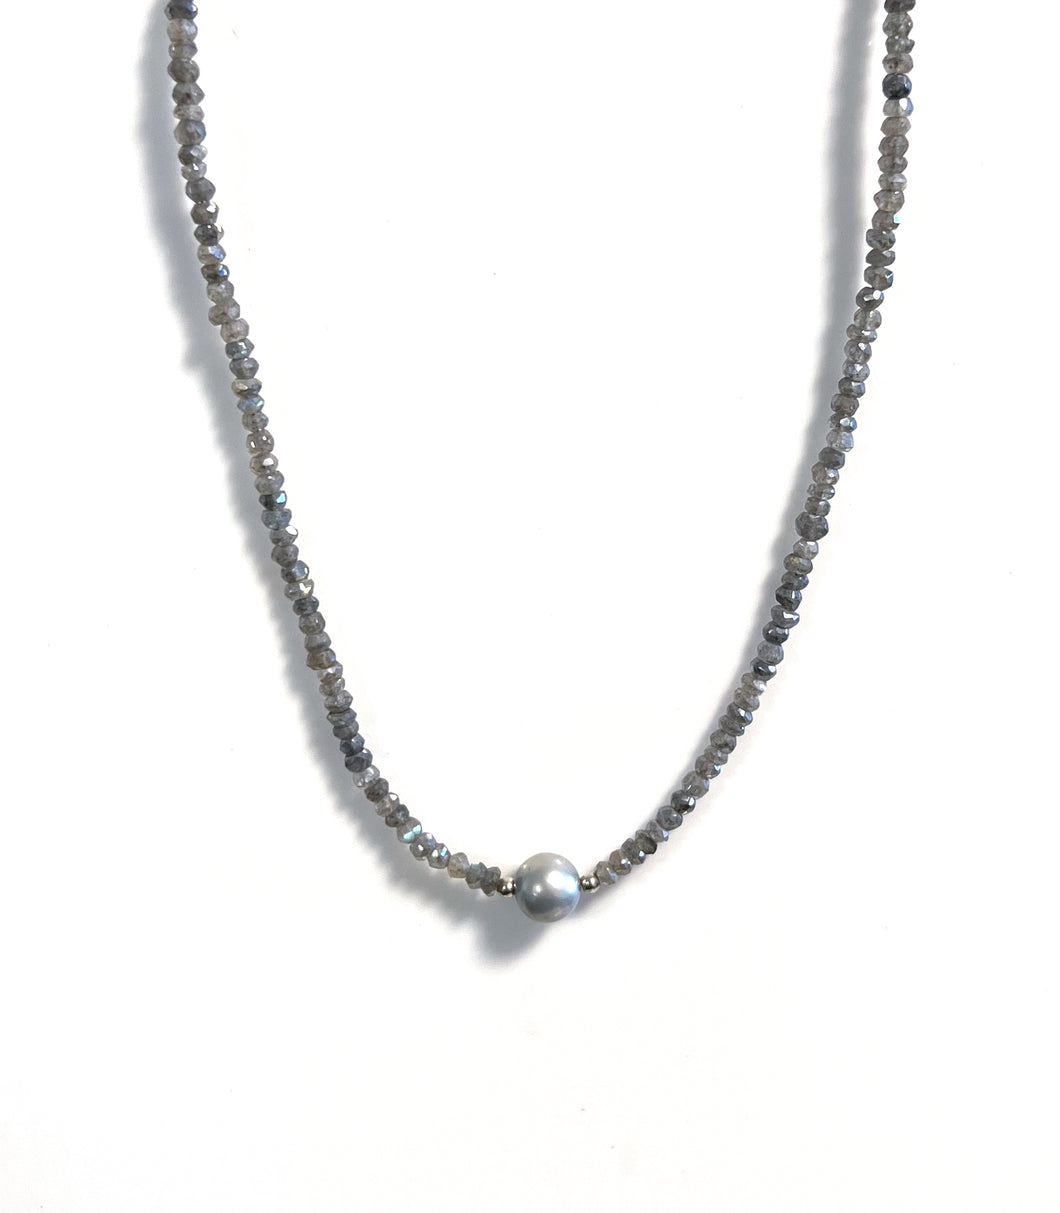 Australian Handmade Grey necklace with Labradorite and Silver Grey Pearl